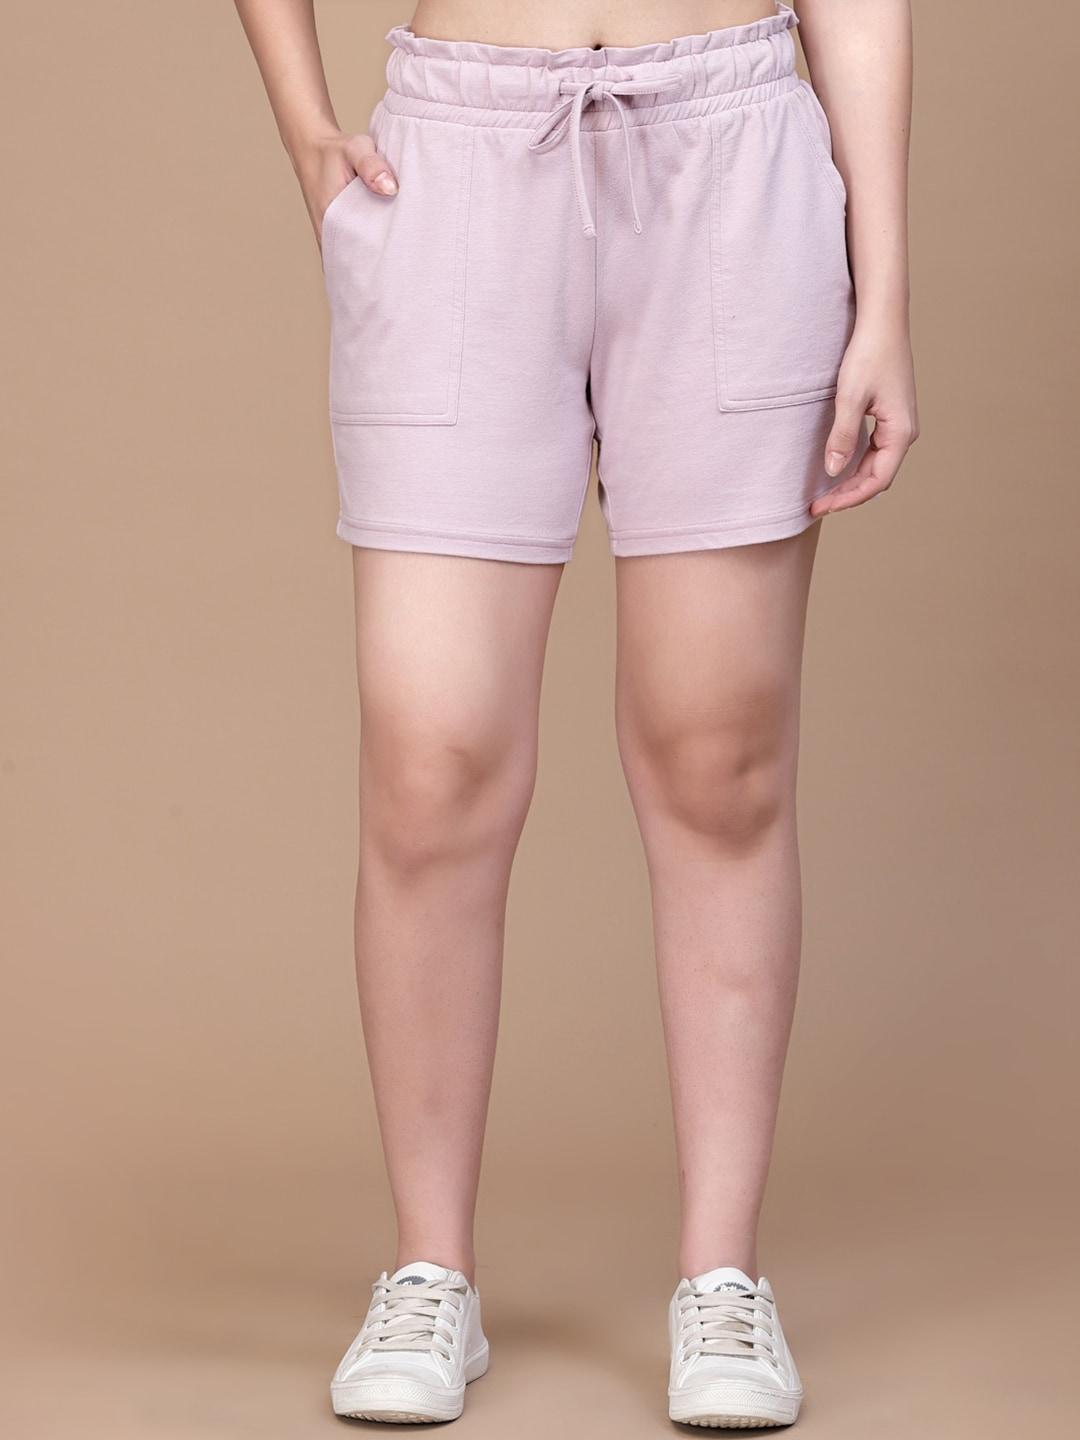 Strong And Brave Women Mid-Rise Cotton Sports Shorts